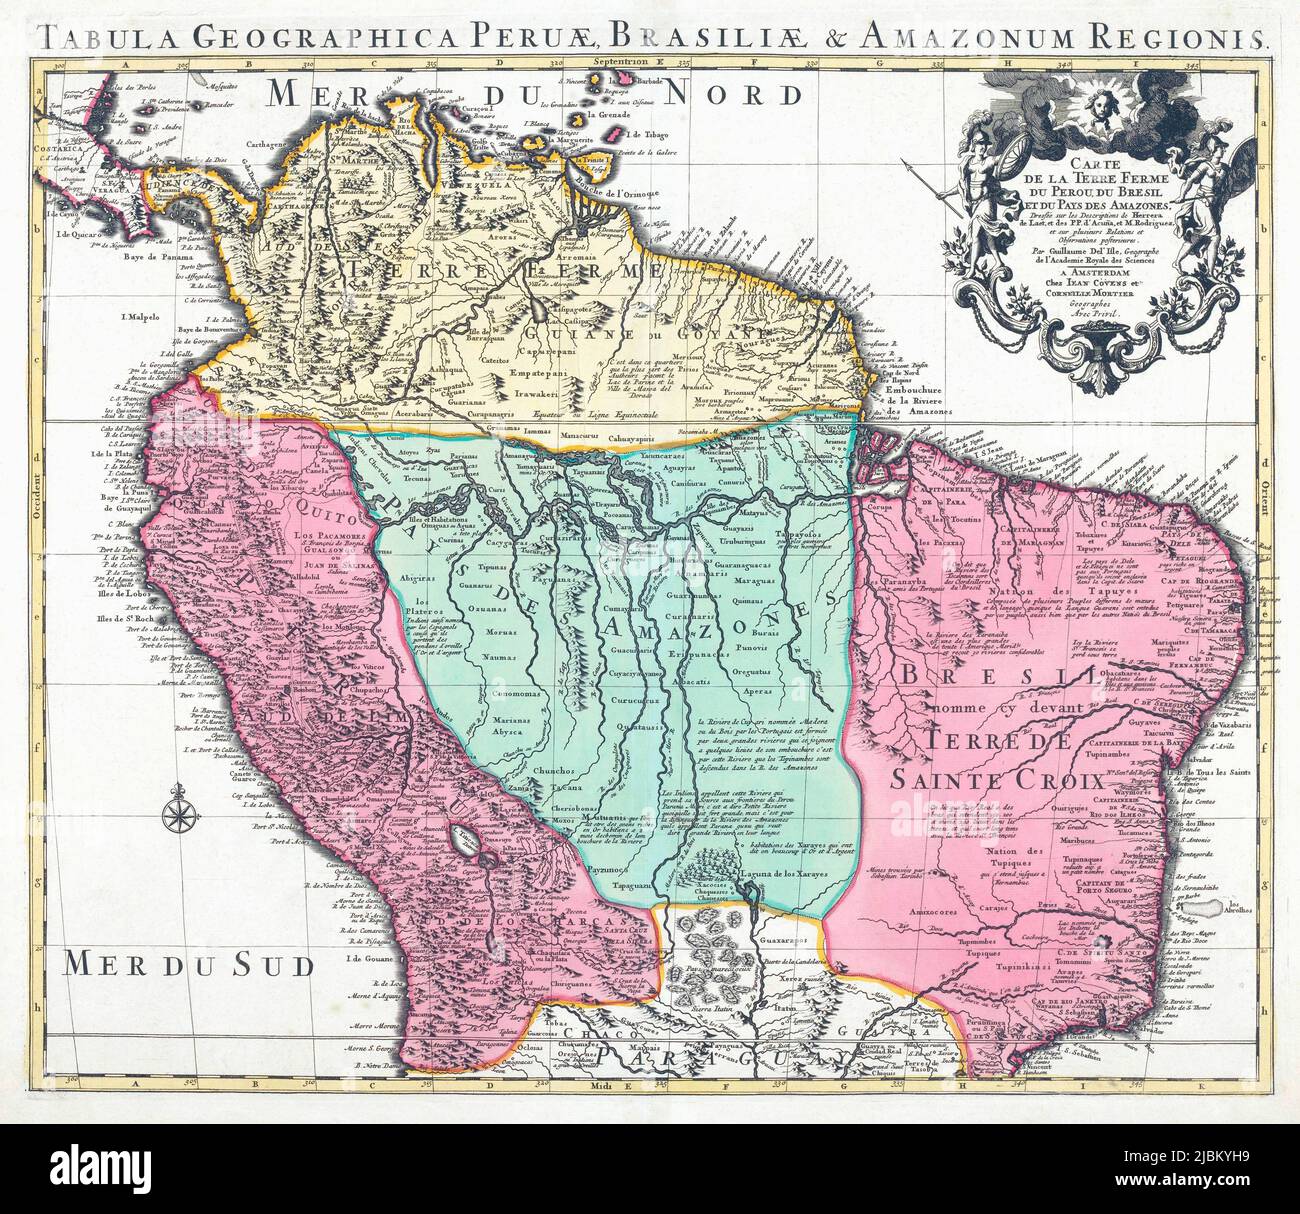 Tabula Geographica Peruae, Brasiliae & Amazonum Regionis.  A Map of Peru, Brazil and the Amazon Regions.  After the map published circa 1830 by Guillaume de L'Isle. Stock Photo